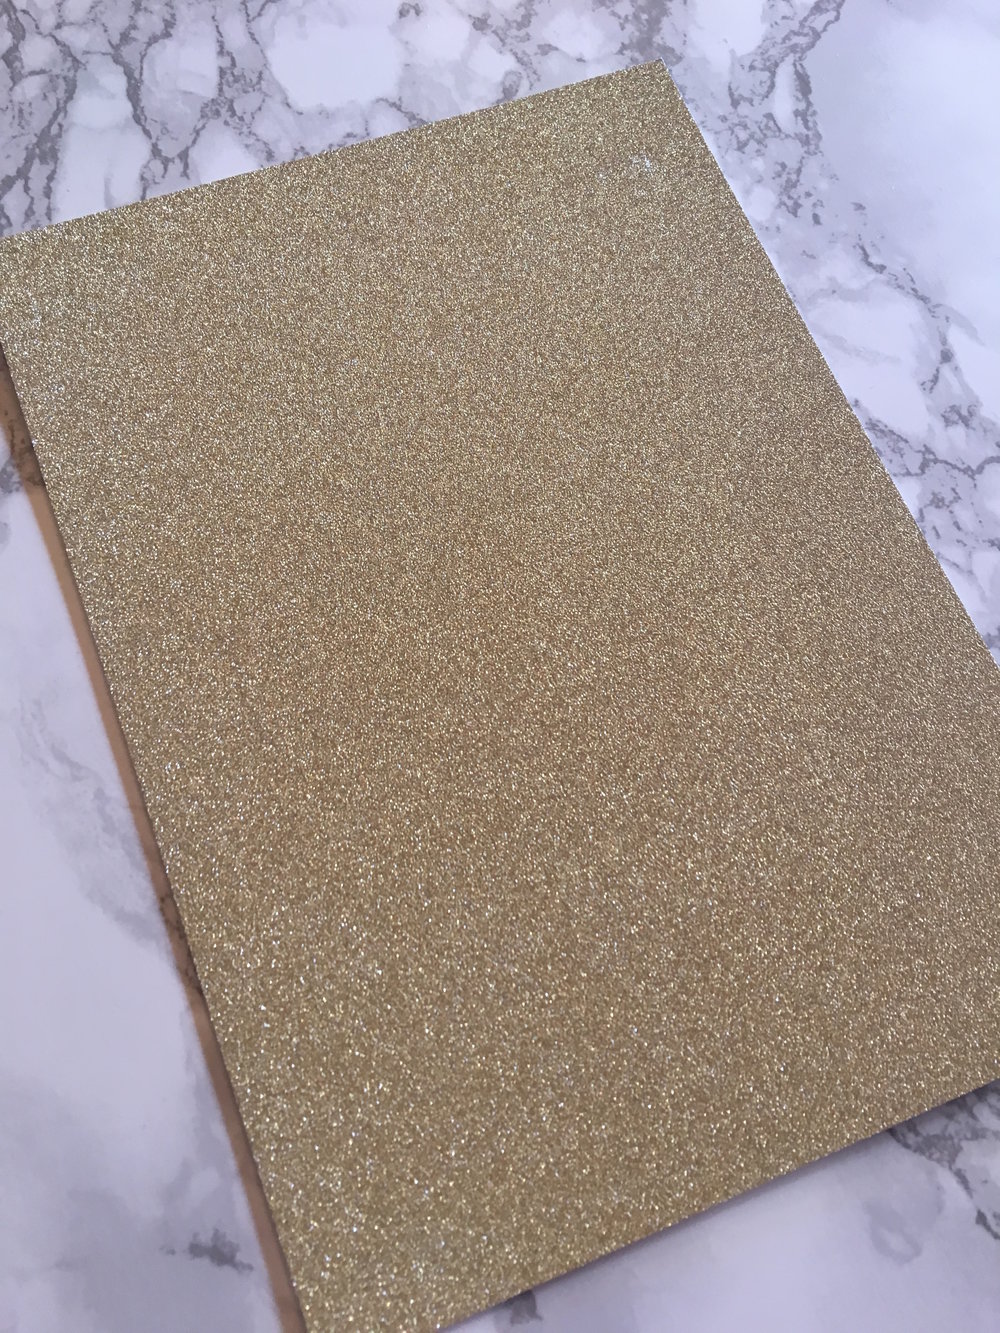 Silver, Gold Glitter Paper for Making Invitations, Cards, Scrapbook, Tags,  Paper Crafts, Gifts Ornaments Lightweight, Flexible, Flake-free 